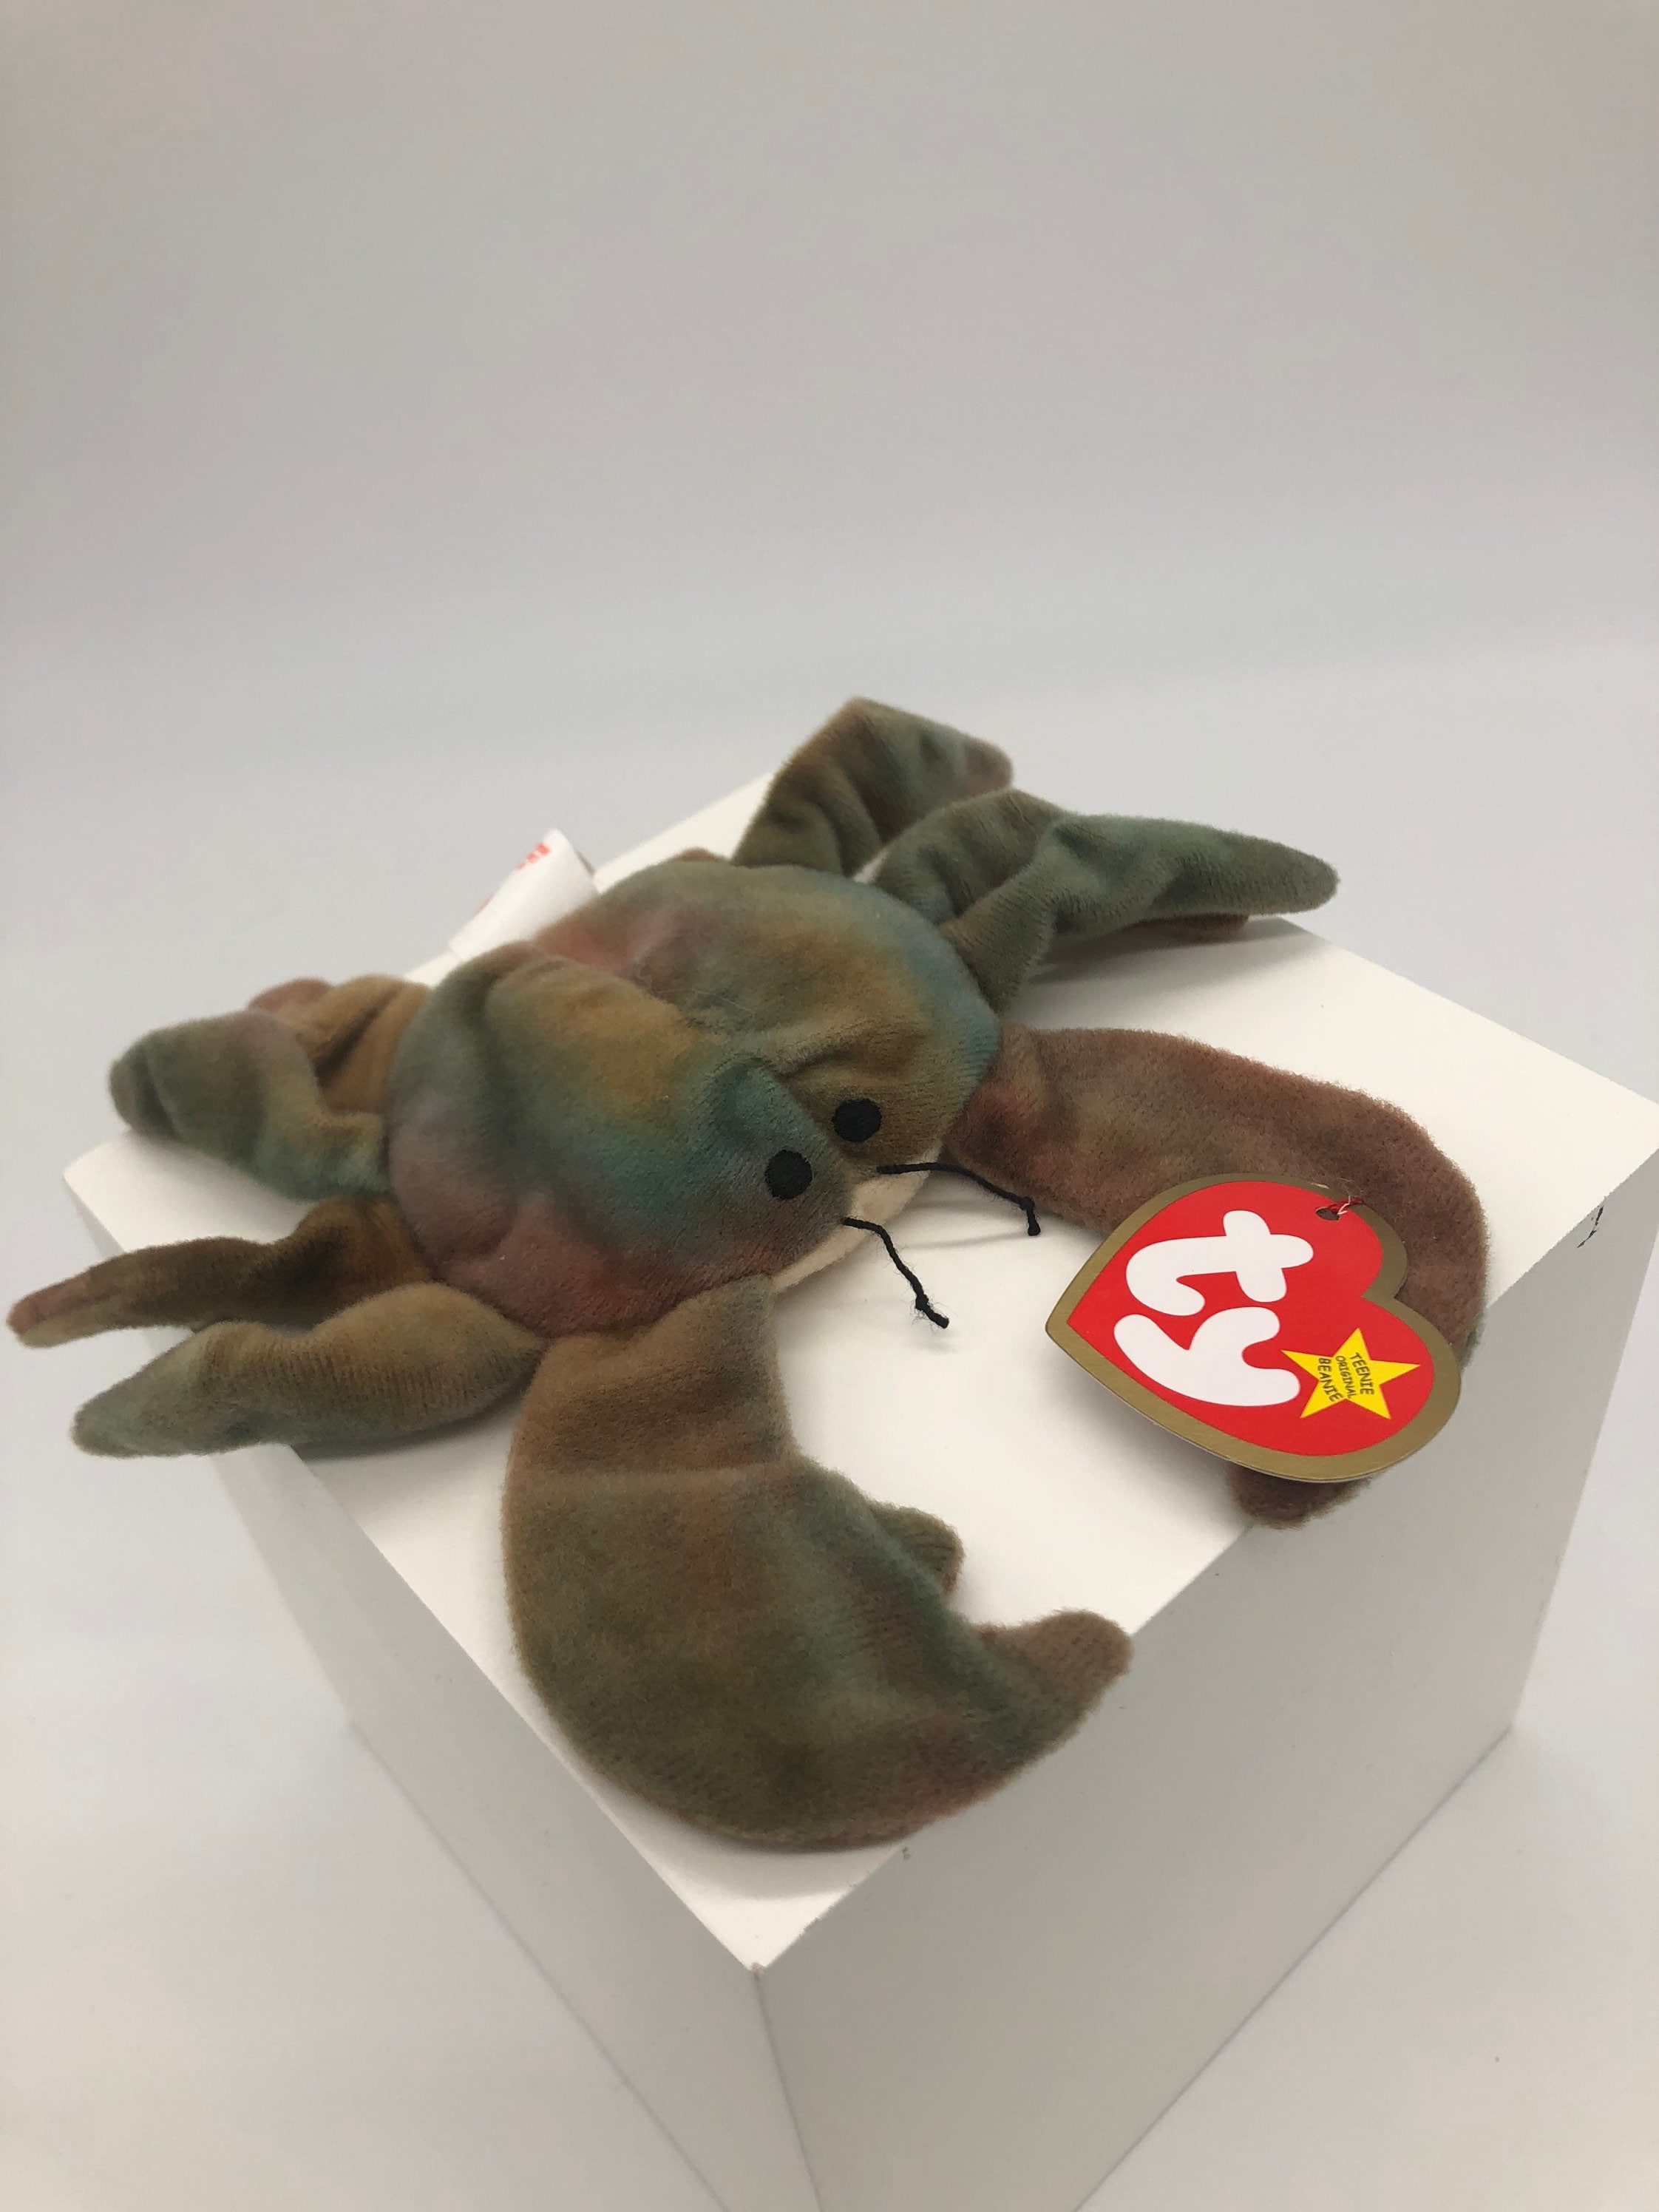 Details about   TY McDonald's Teenie Beanie Baby Claude the Crab No Hang Tag 